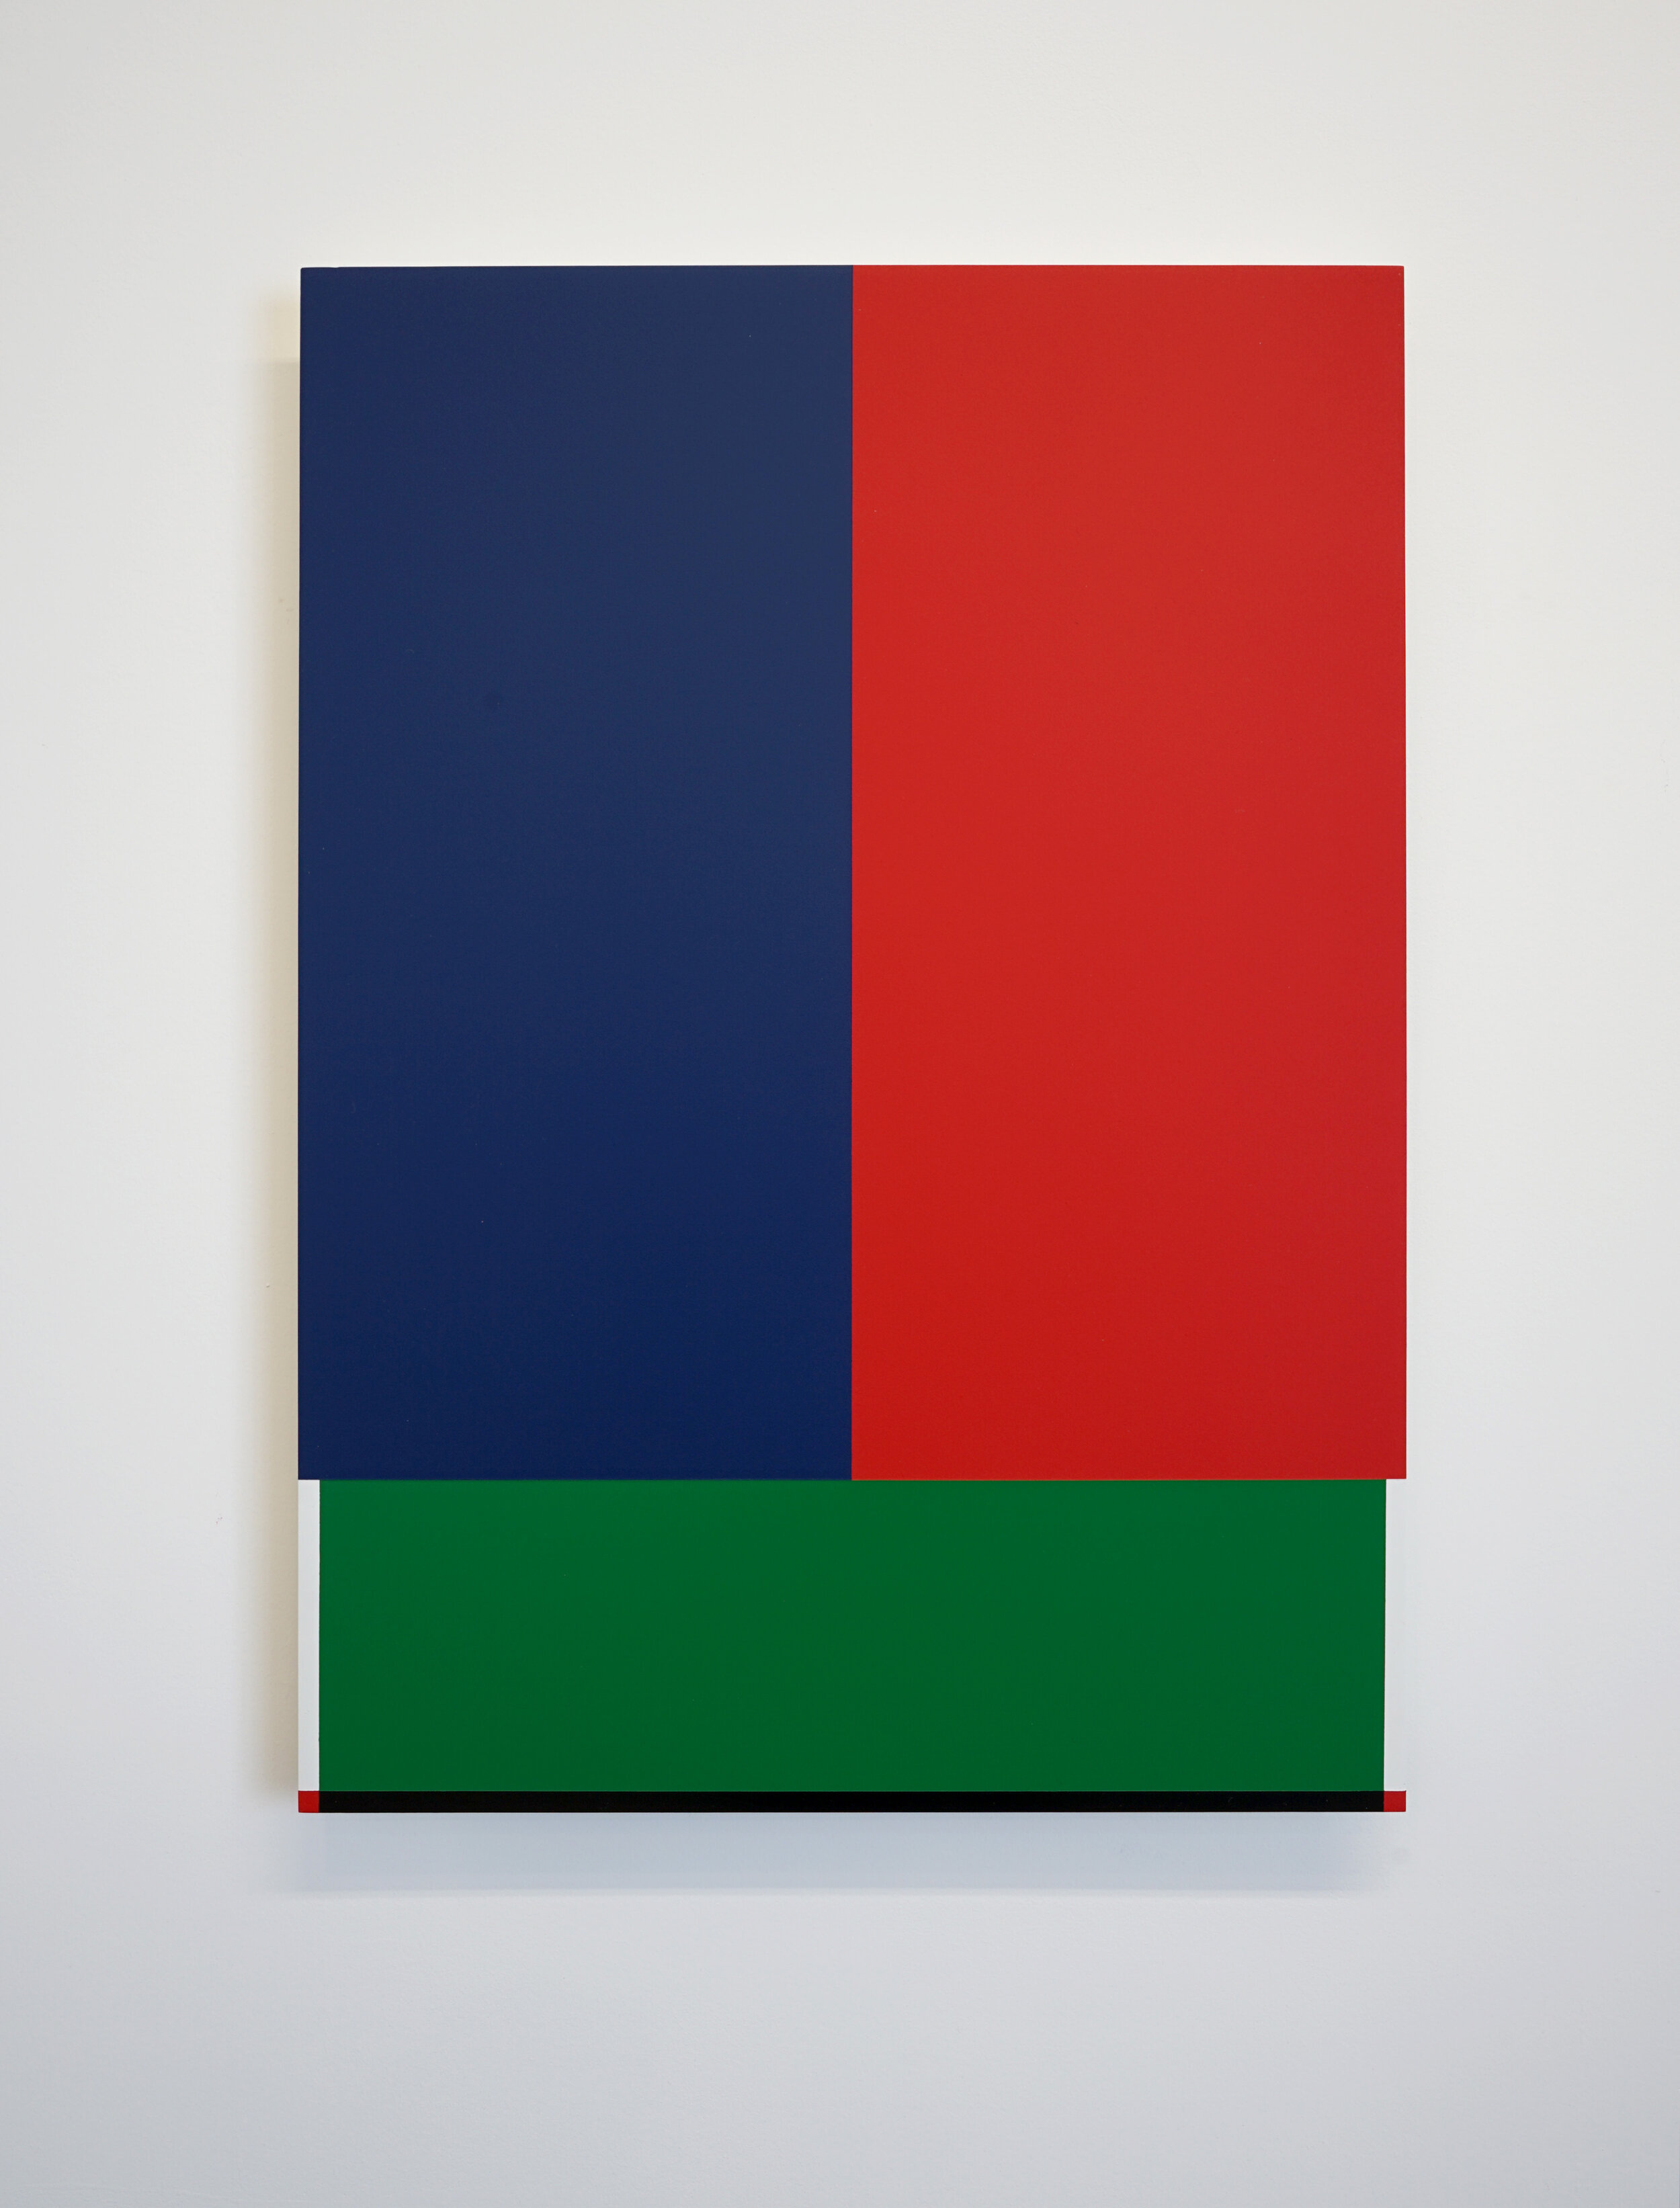  “Red And Blue Over Green”  2019  28” x 20”  spray paint on aluminum 